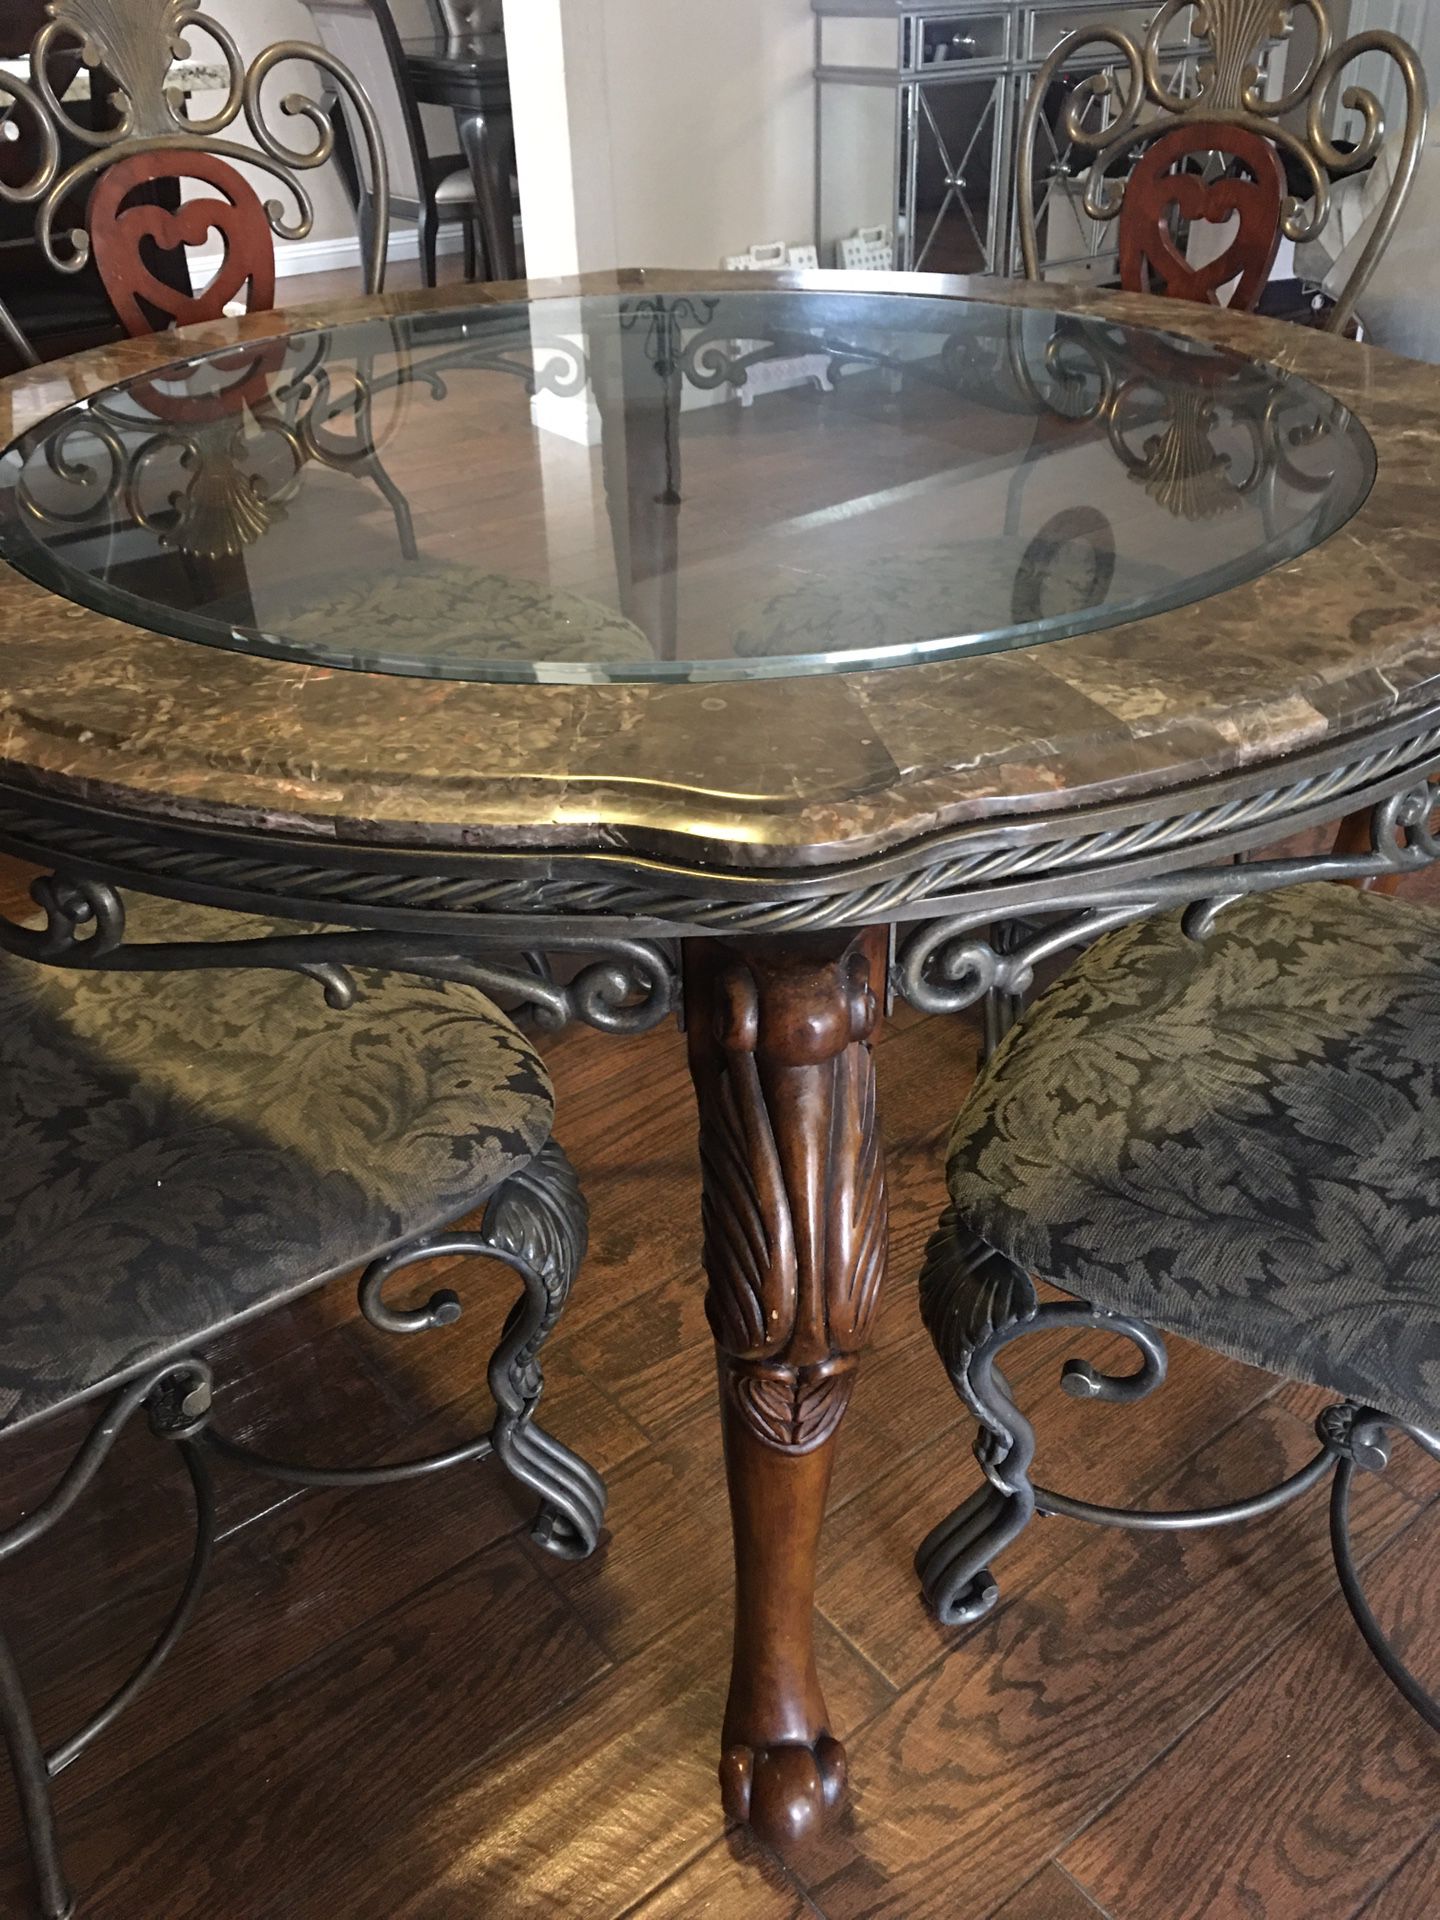 Glass and marble dining table for 4, good condition (see description for more)